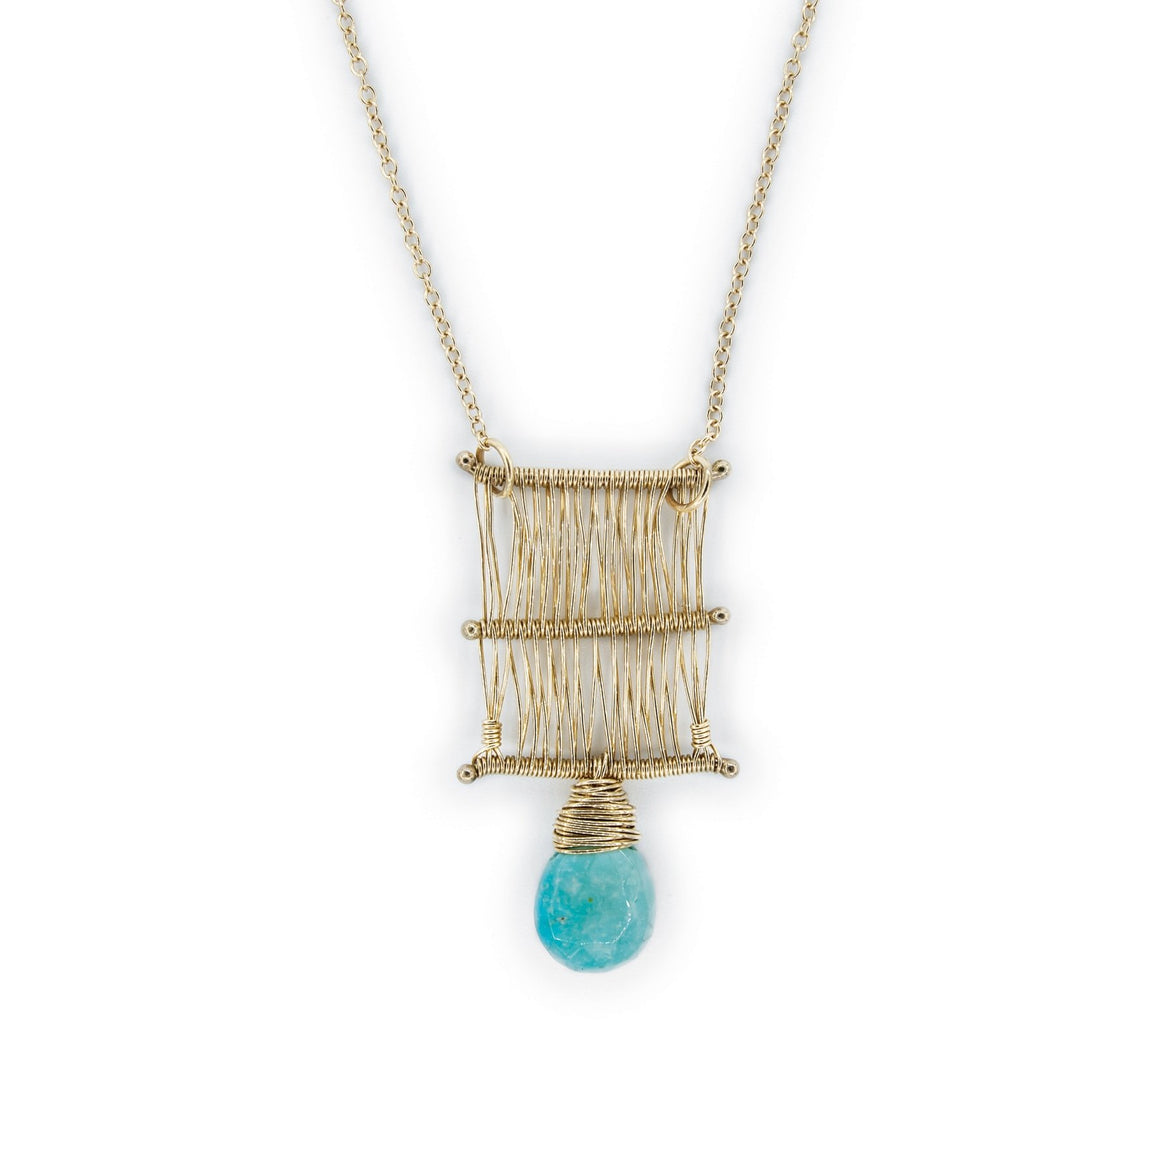 14k Gold and Turquoise Hand Woven Tapestry Necklace by Original Sin Jewelry